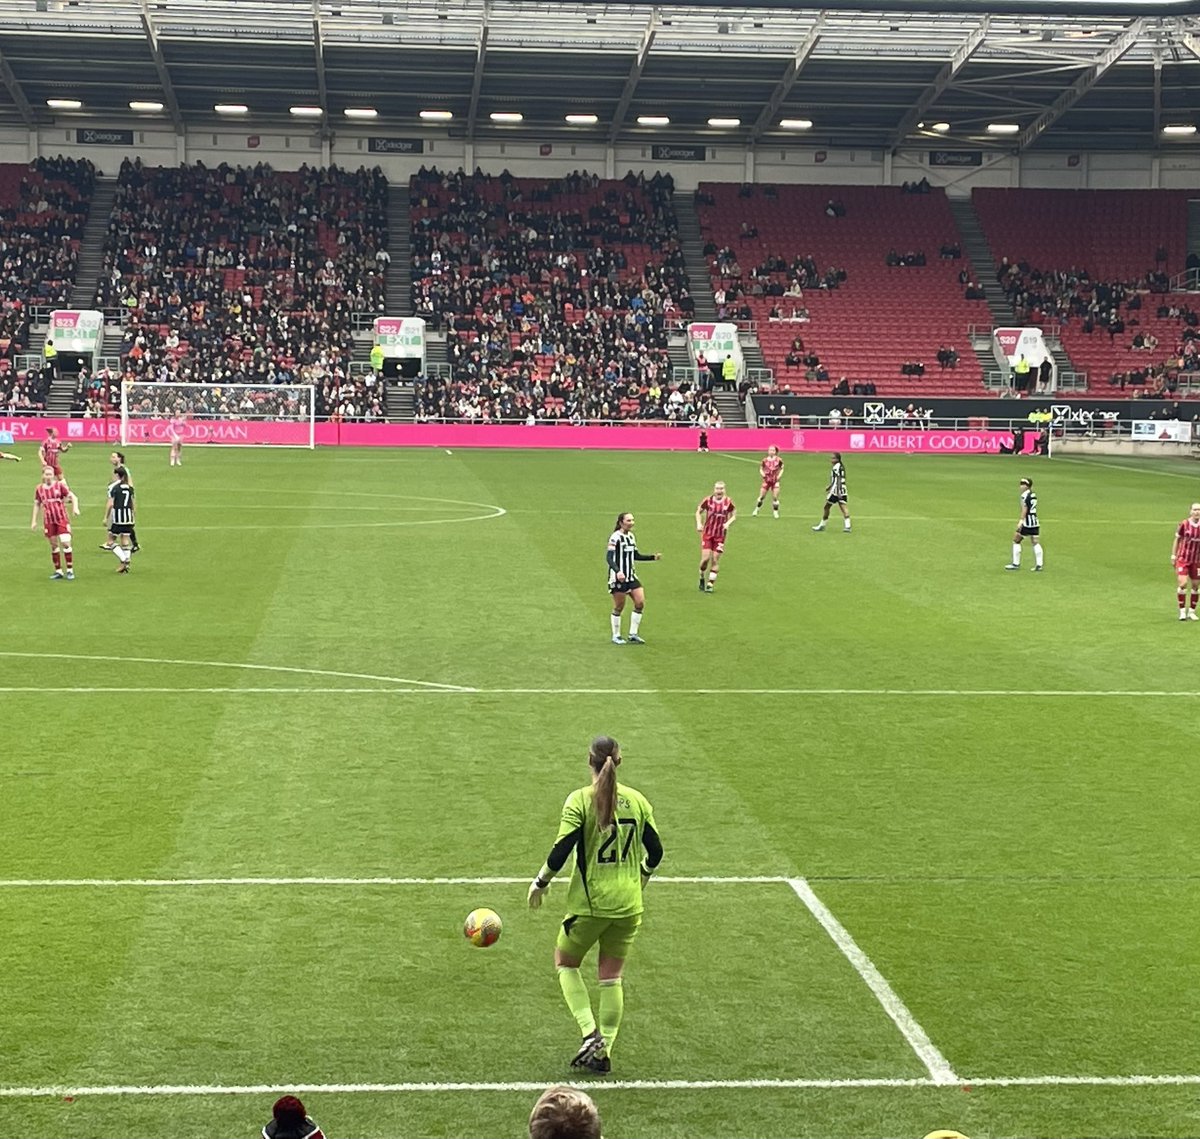 As a below average goalkeeper myself, it’s a pretty surreal day at work when you get to watch the worlds best in action. This is my JOB, you can get paid to do this kids. Support women’s sport; they deserve the highest quality pitches, but we need help. Become a groundswoman 💪🏼